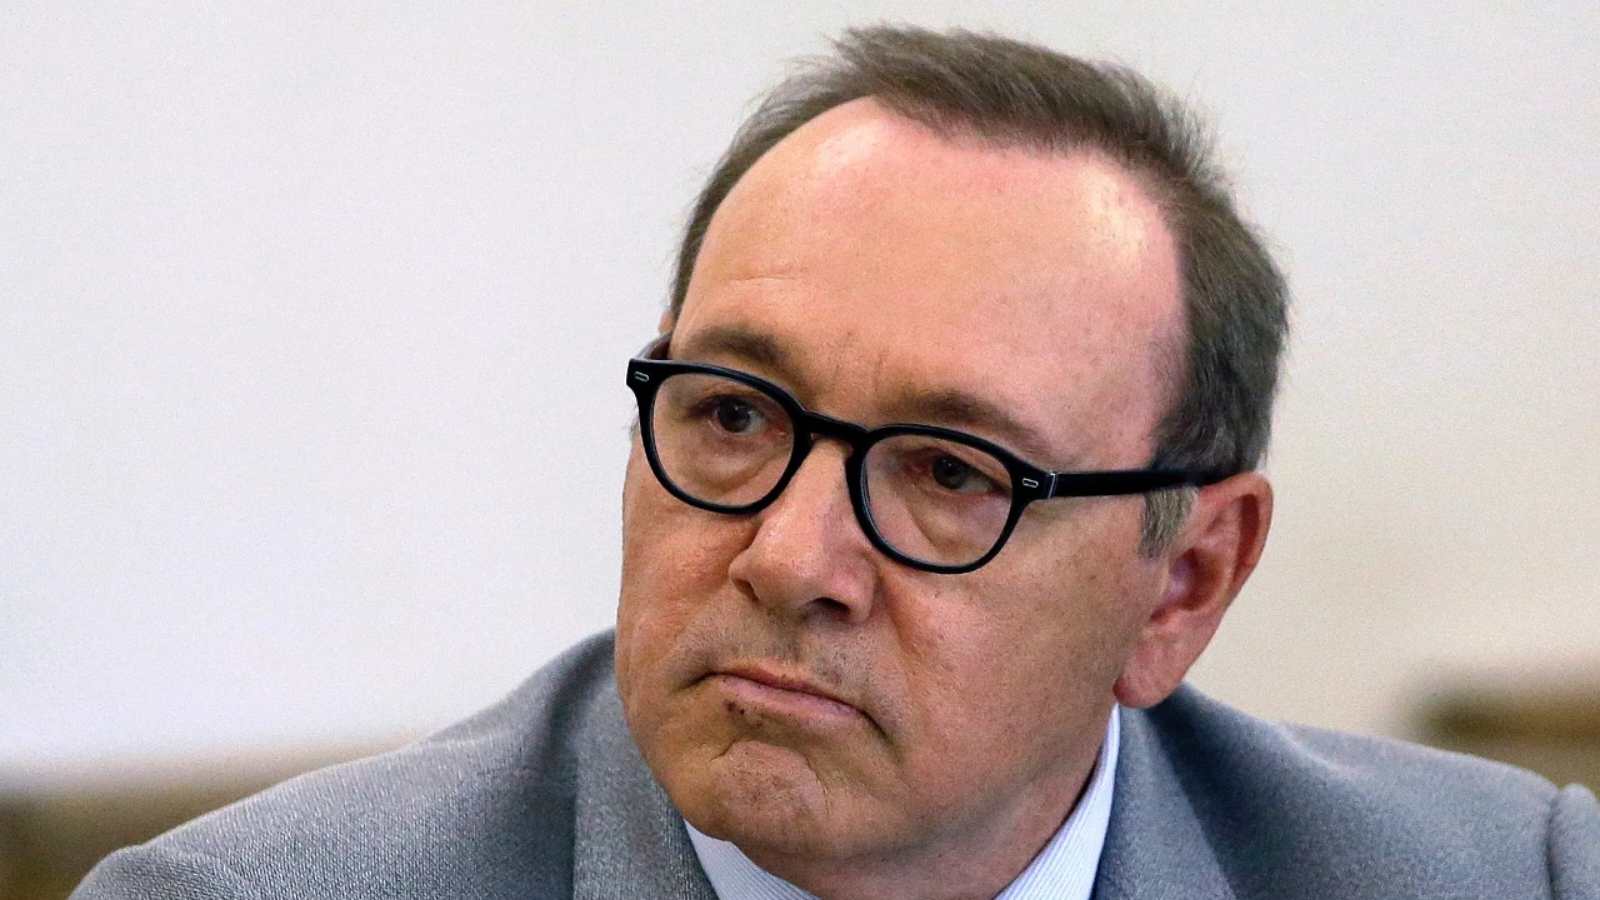 Kevin Spacey was accused in England of 4 charges of sexual assault.